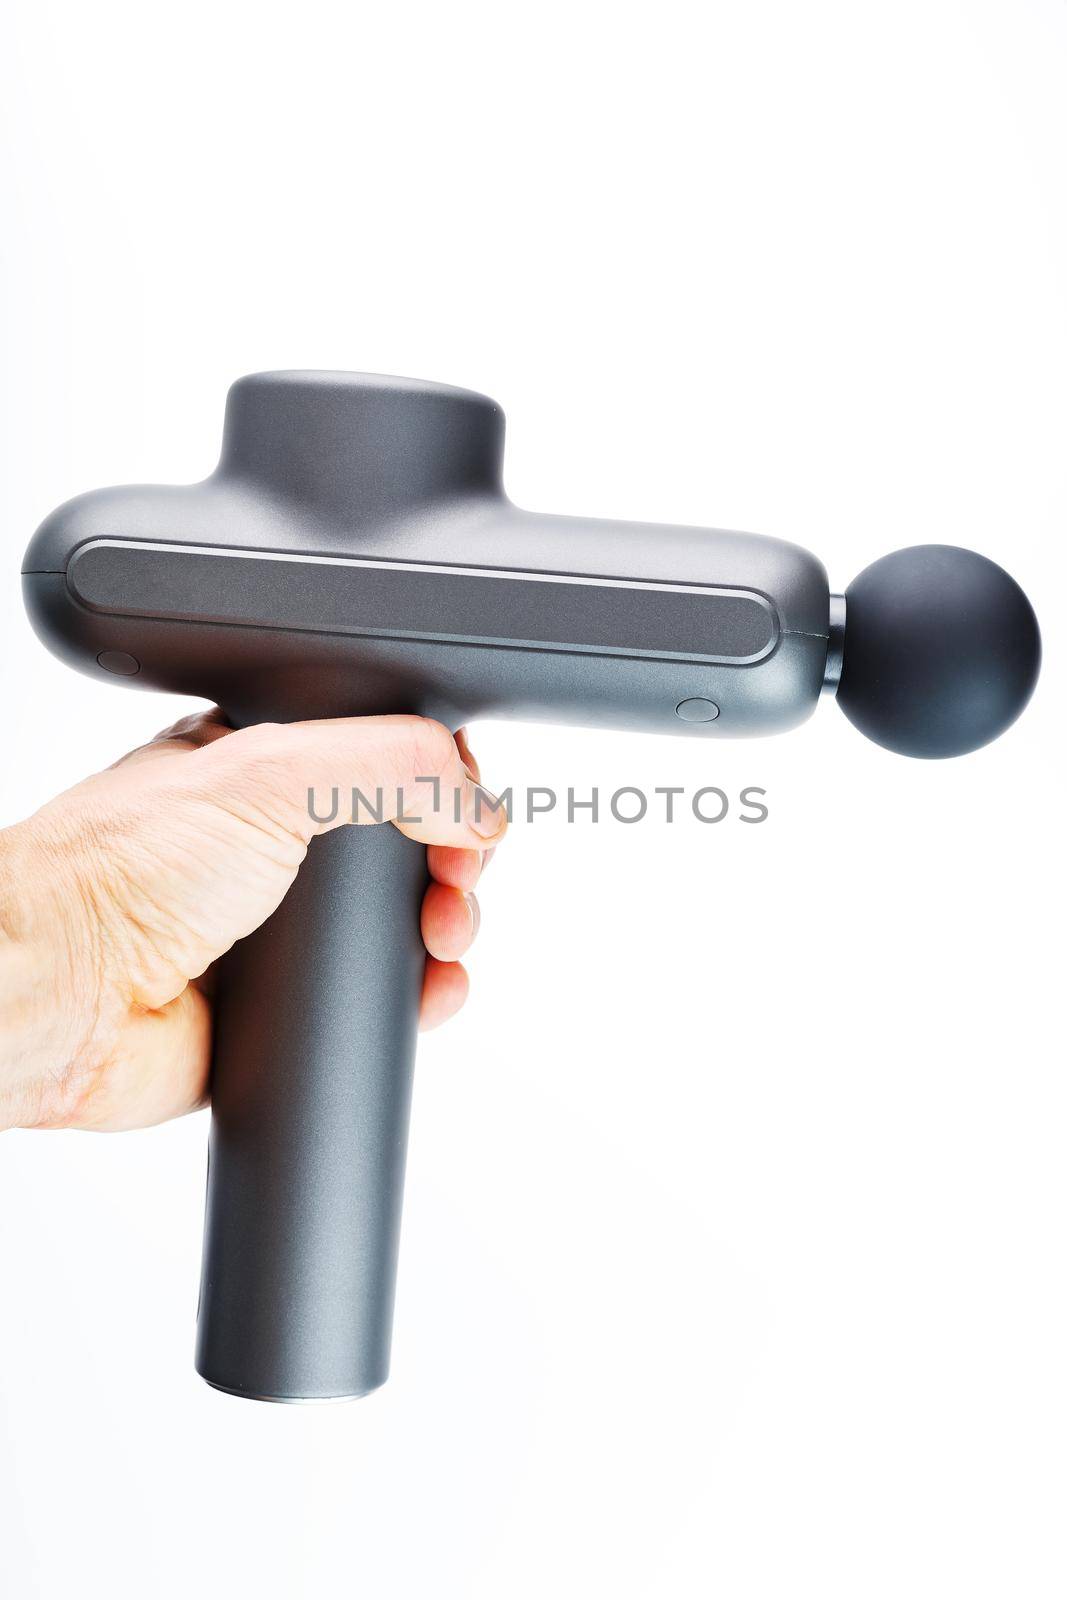 Manual electric body massager in hand on a white background. Isolate